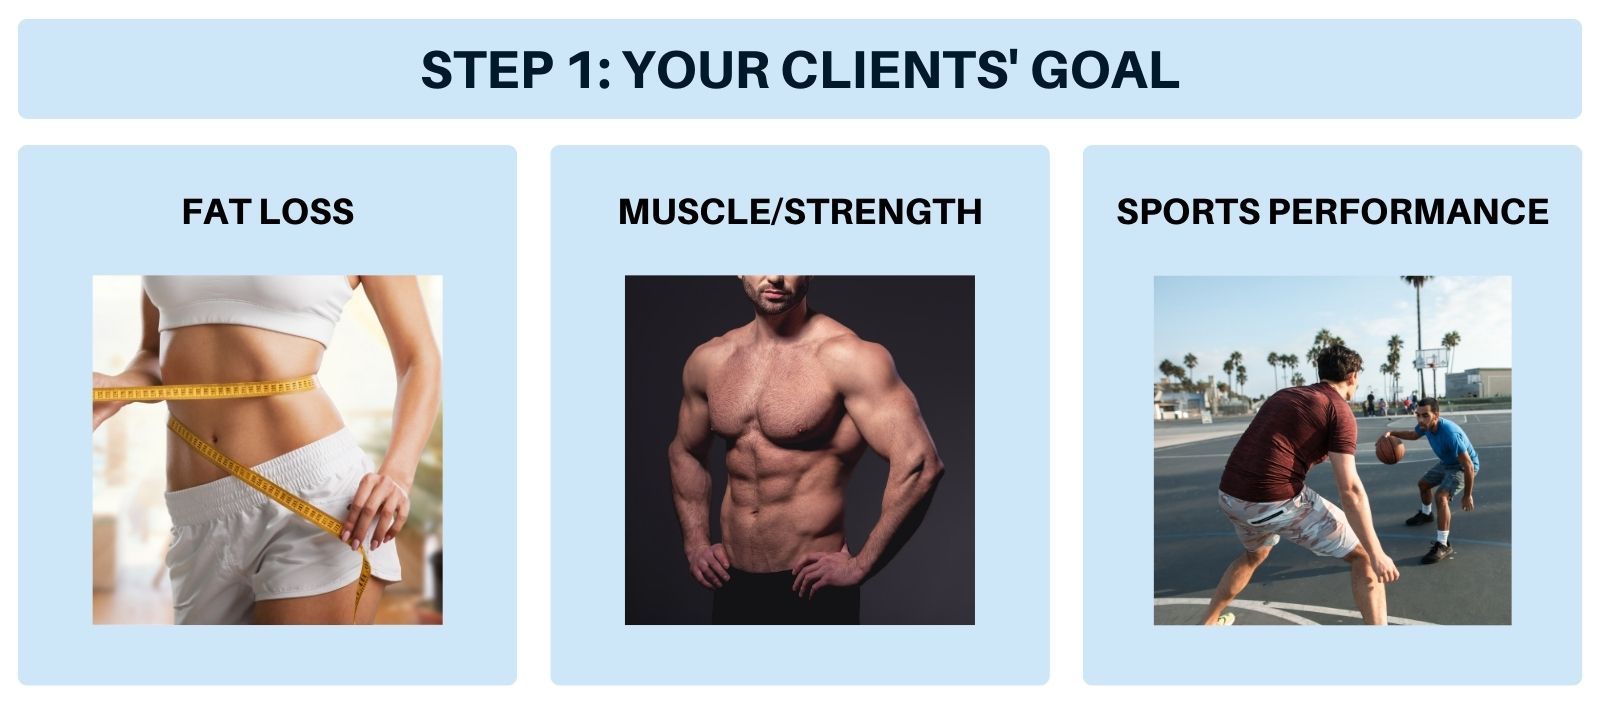 How to Design Workout Programs for Clients (Tips + Guide